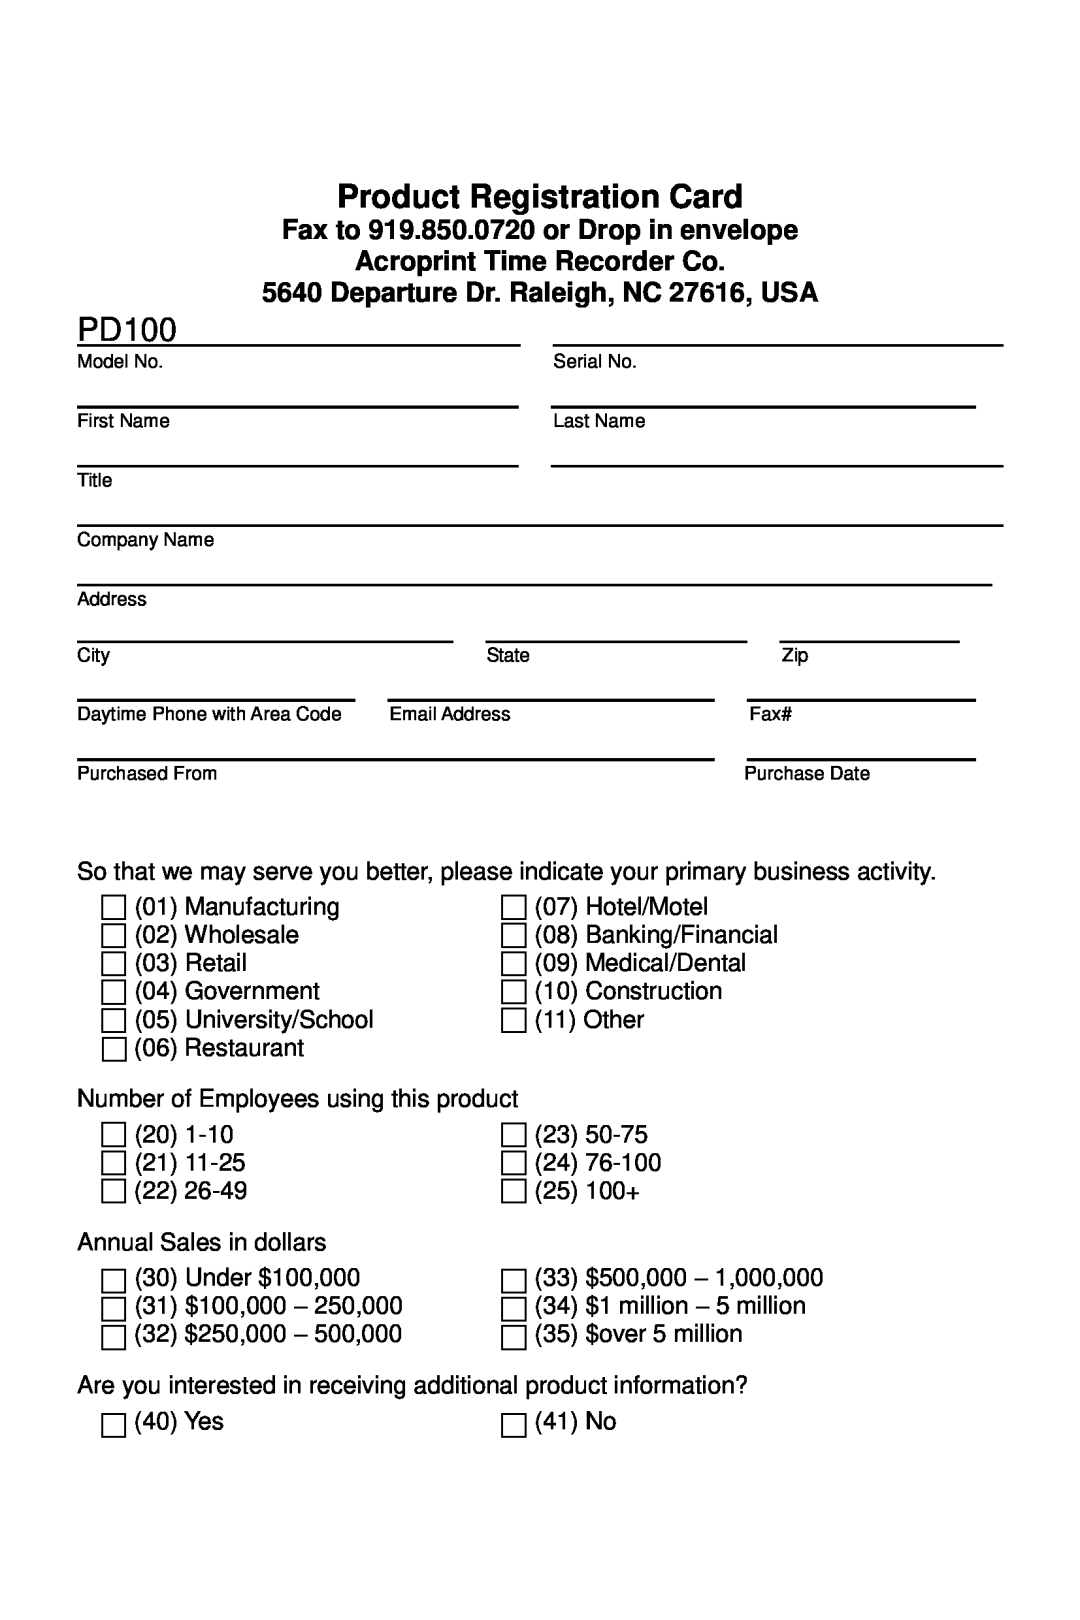 Acroprint PD100 user manual Product Registration Card, Fax to 919.850.0720 or Drop in envelope Acroprint Time Recorder Co 